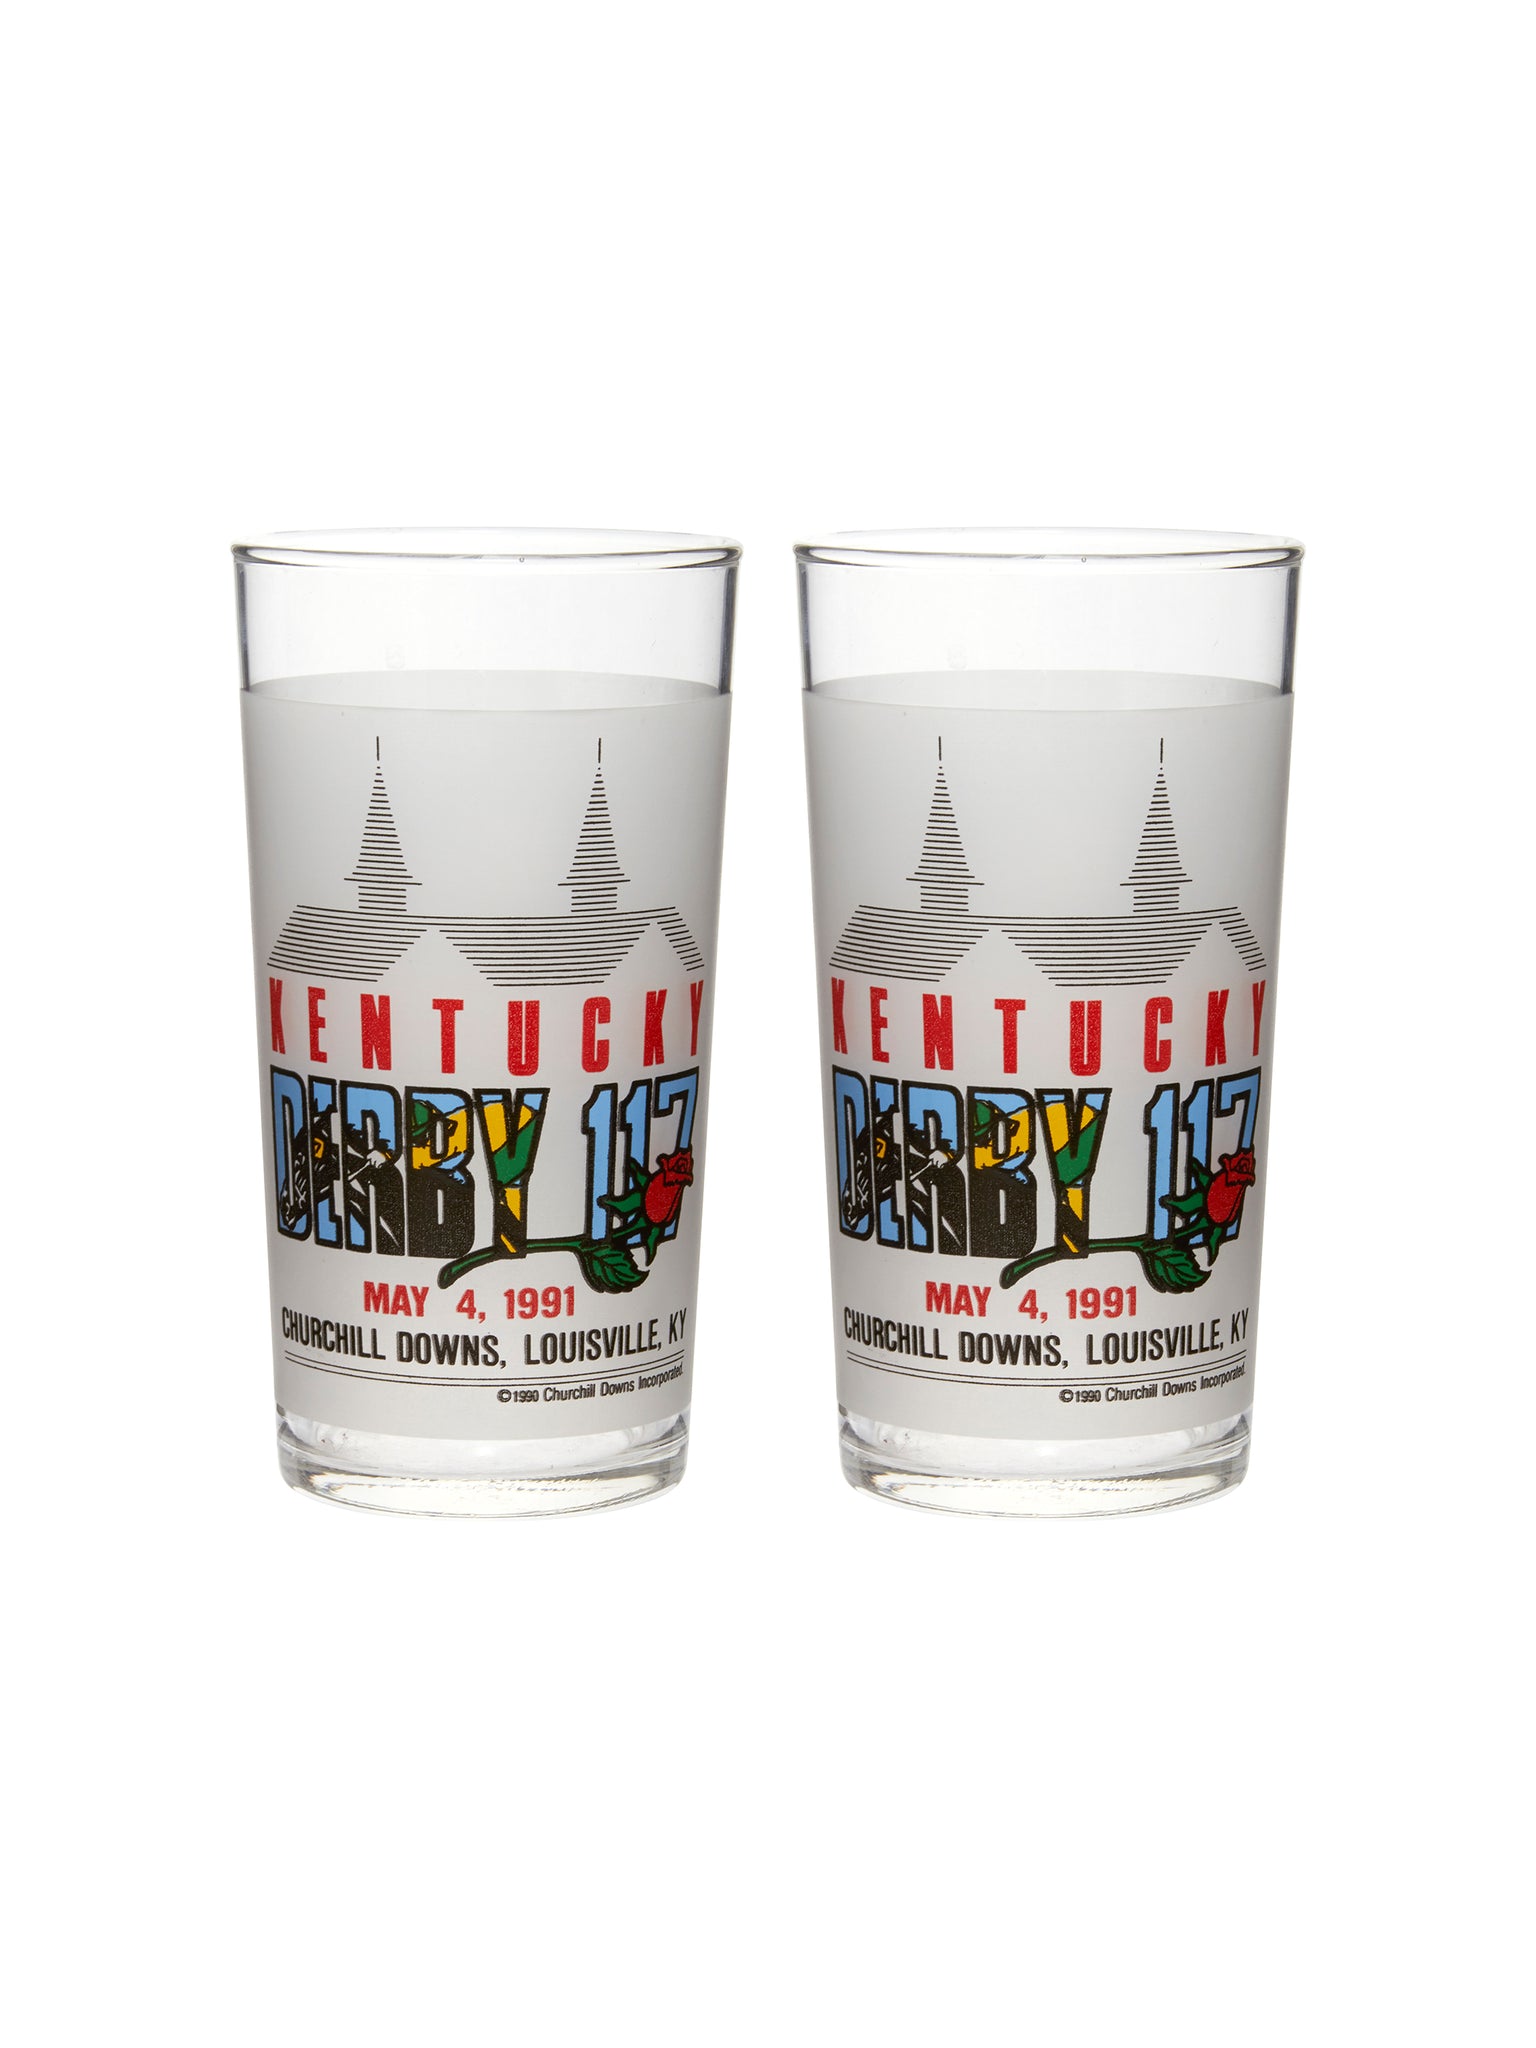 Vintage Kentucky Derby 117th Mint Julep Glasses Set of Two Weston Table